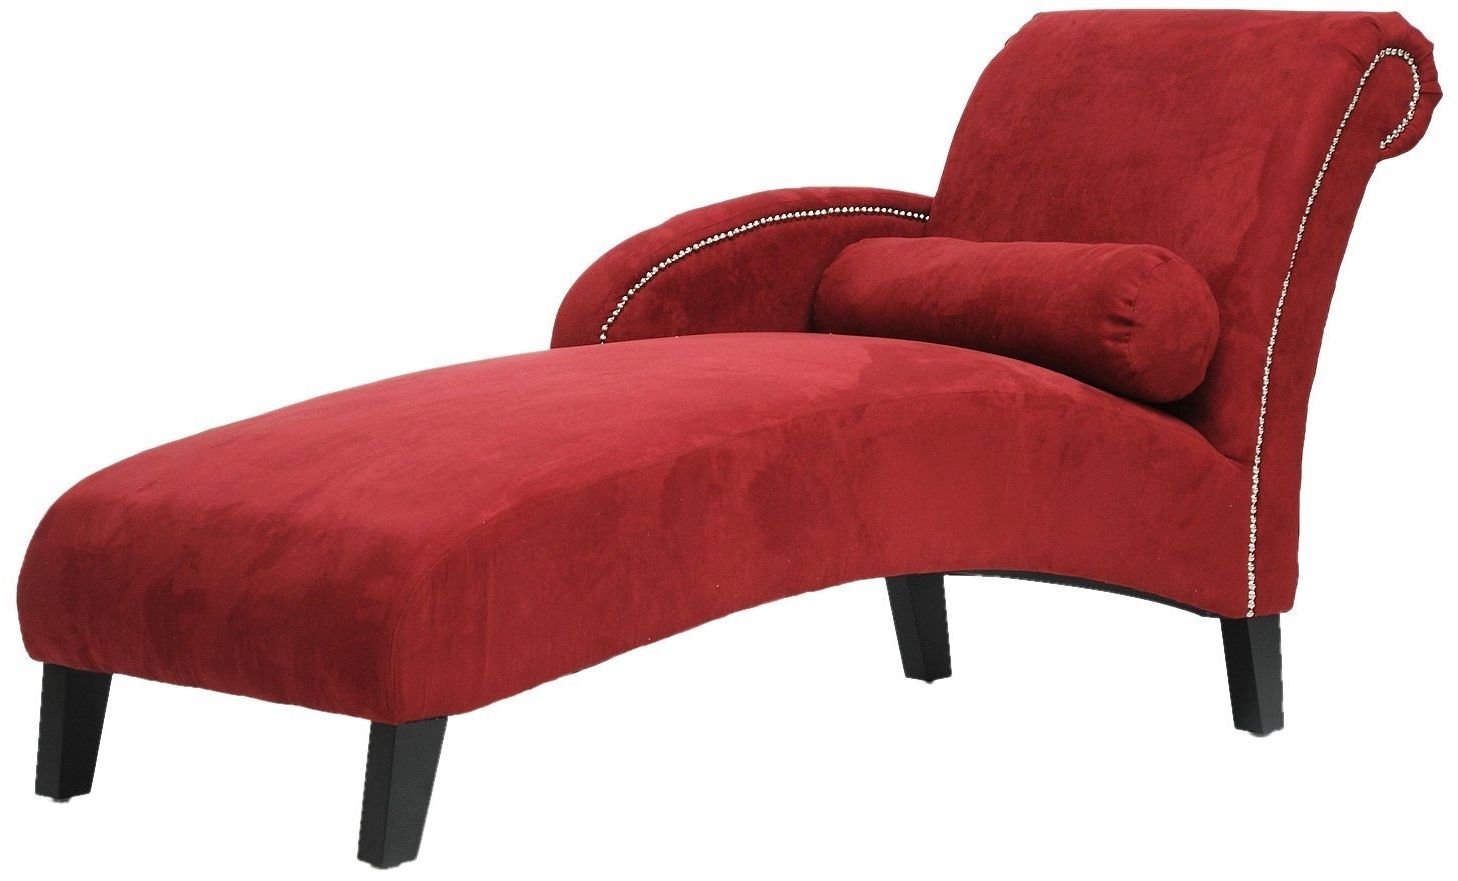 Red Chaise Lounges Regarding Latest Amazon: Baxton Studio Hestia Microfiber Modern Chaise Lounge (View 4 of 15)